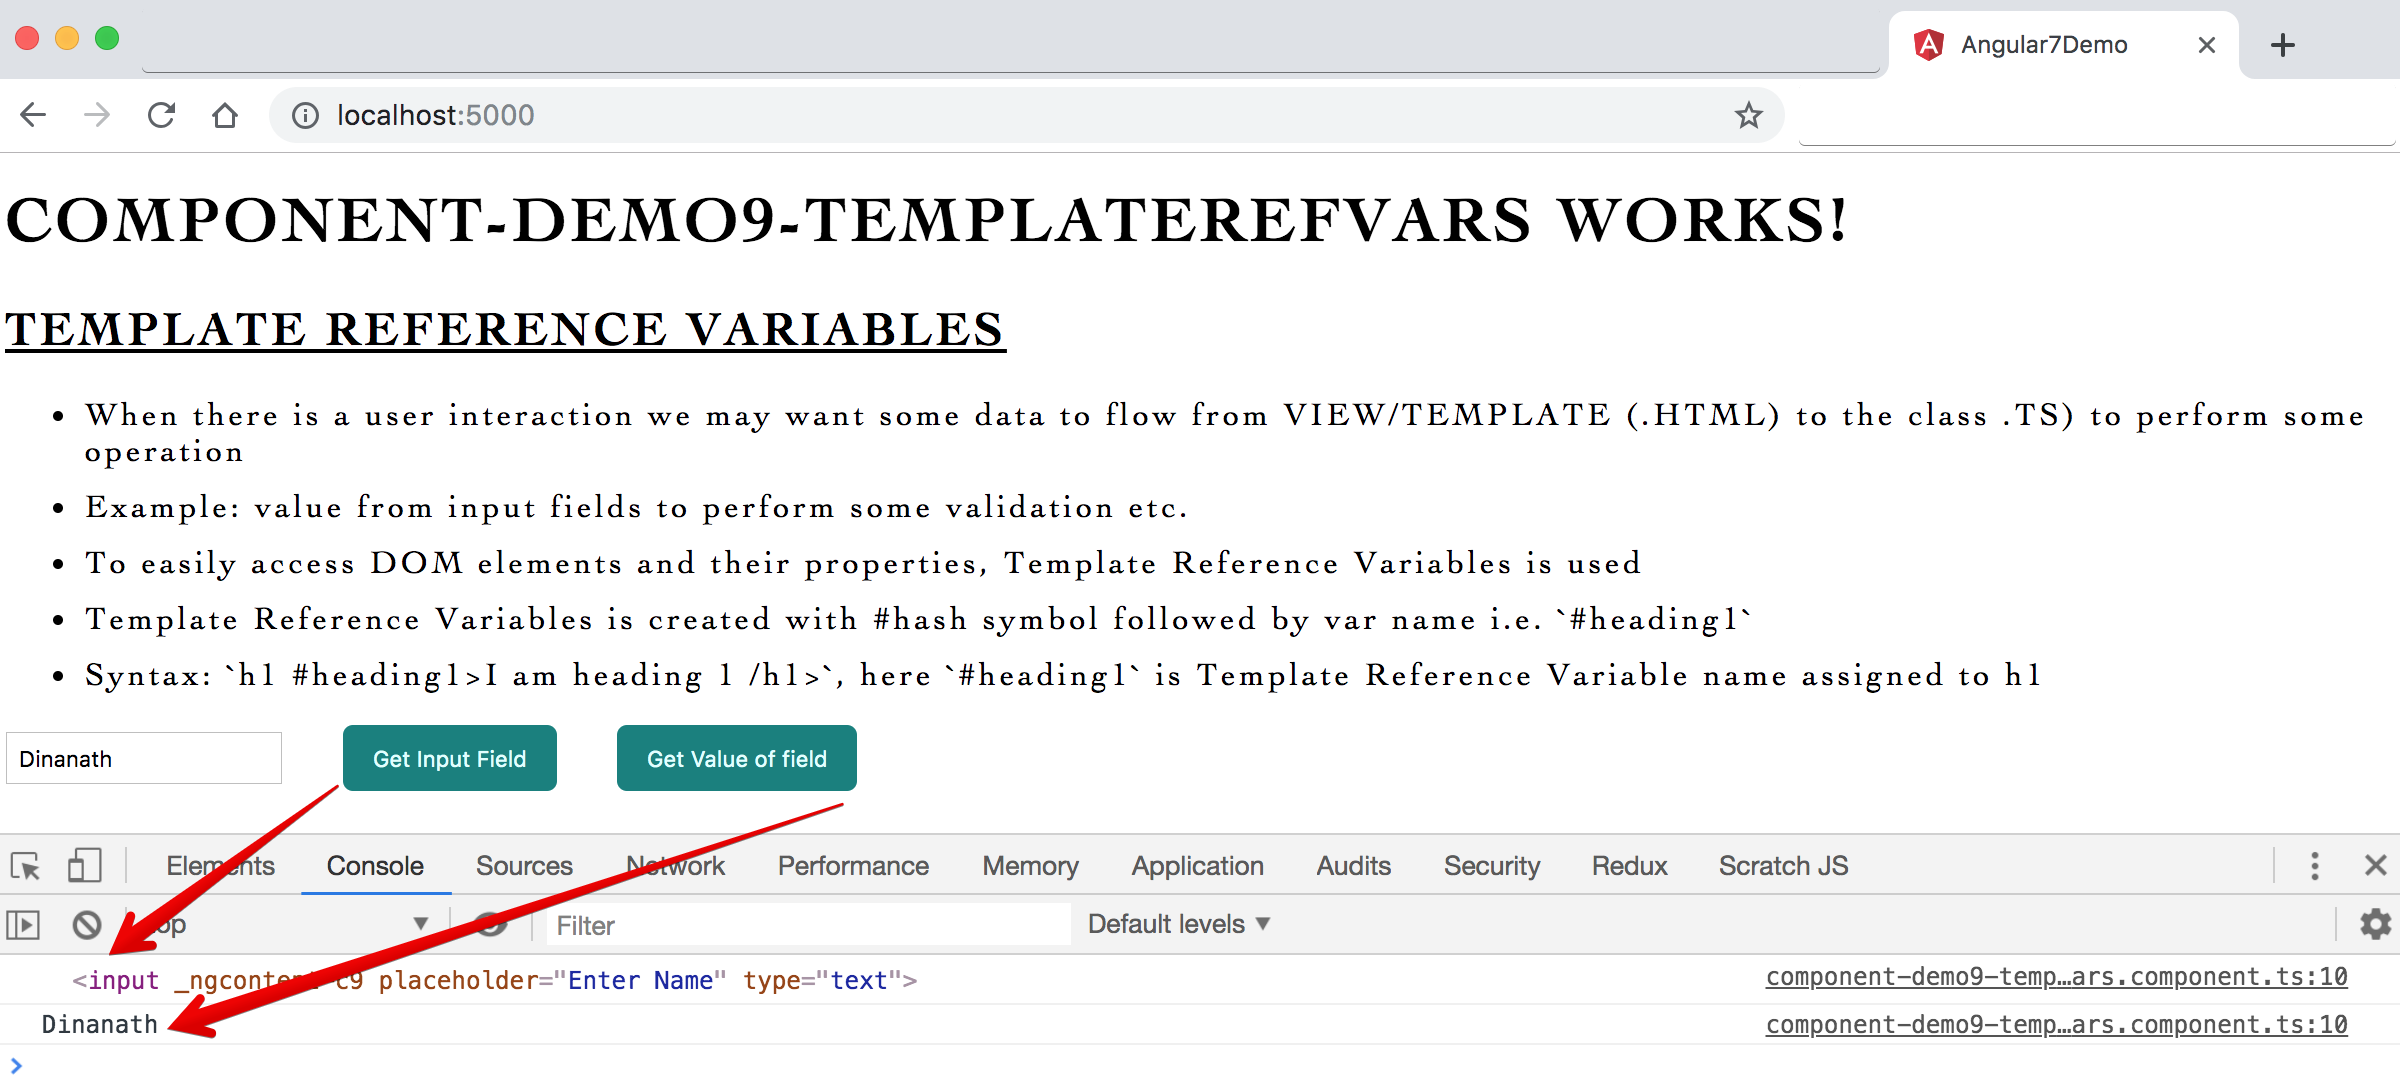 Output - Template Reference Variables